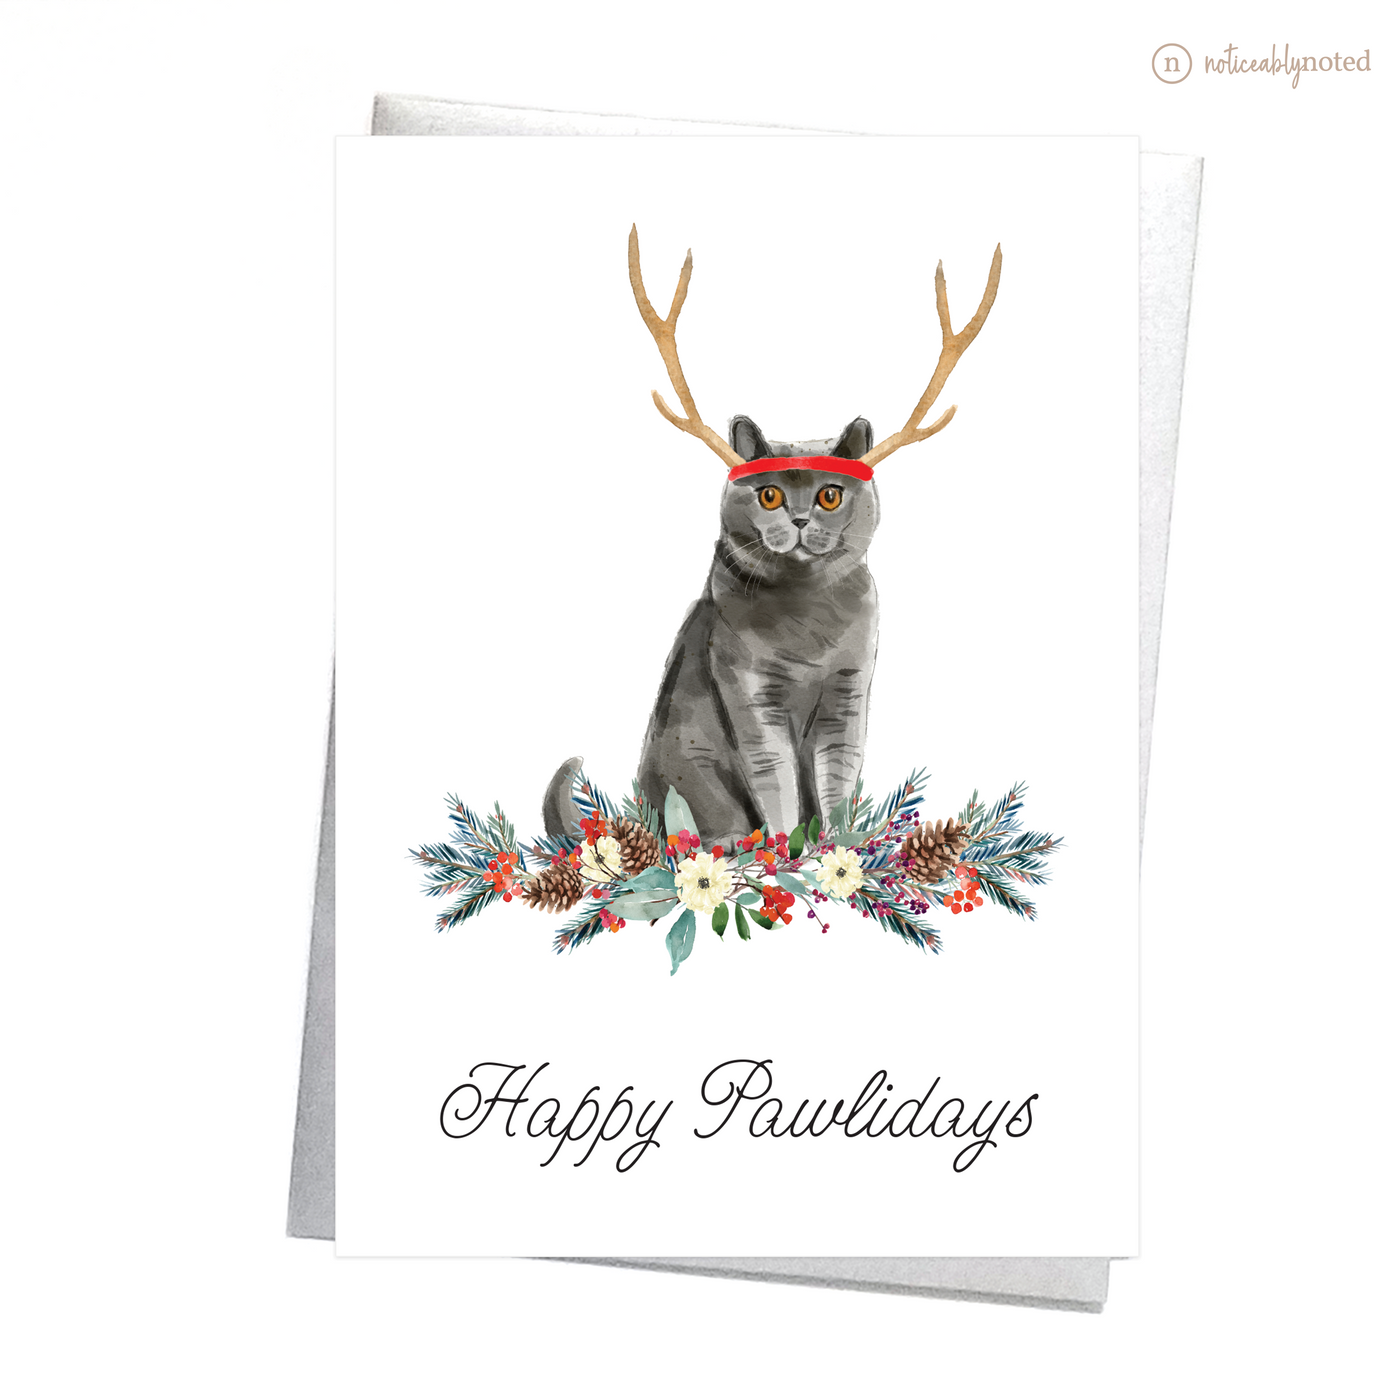 British Shorthair Holiday Greeting Cards | Noticeably Noted